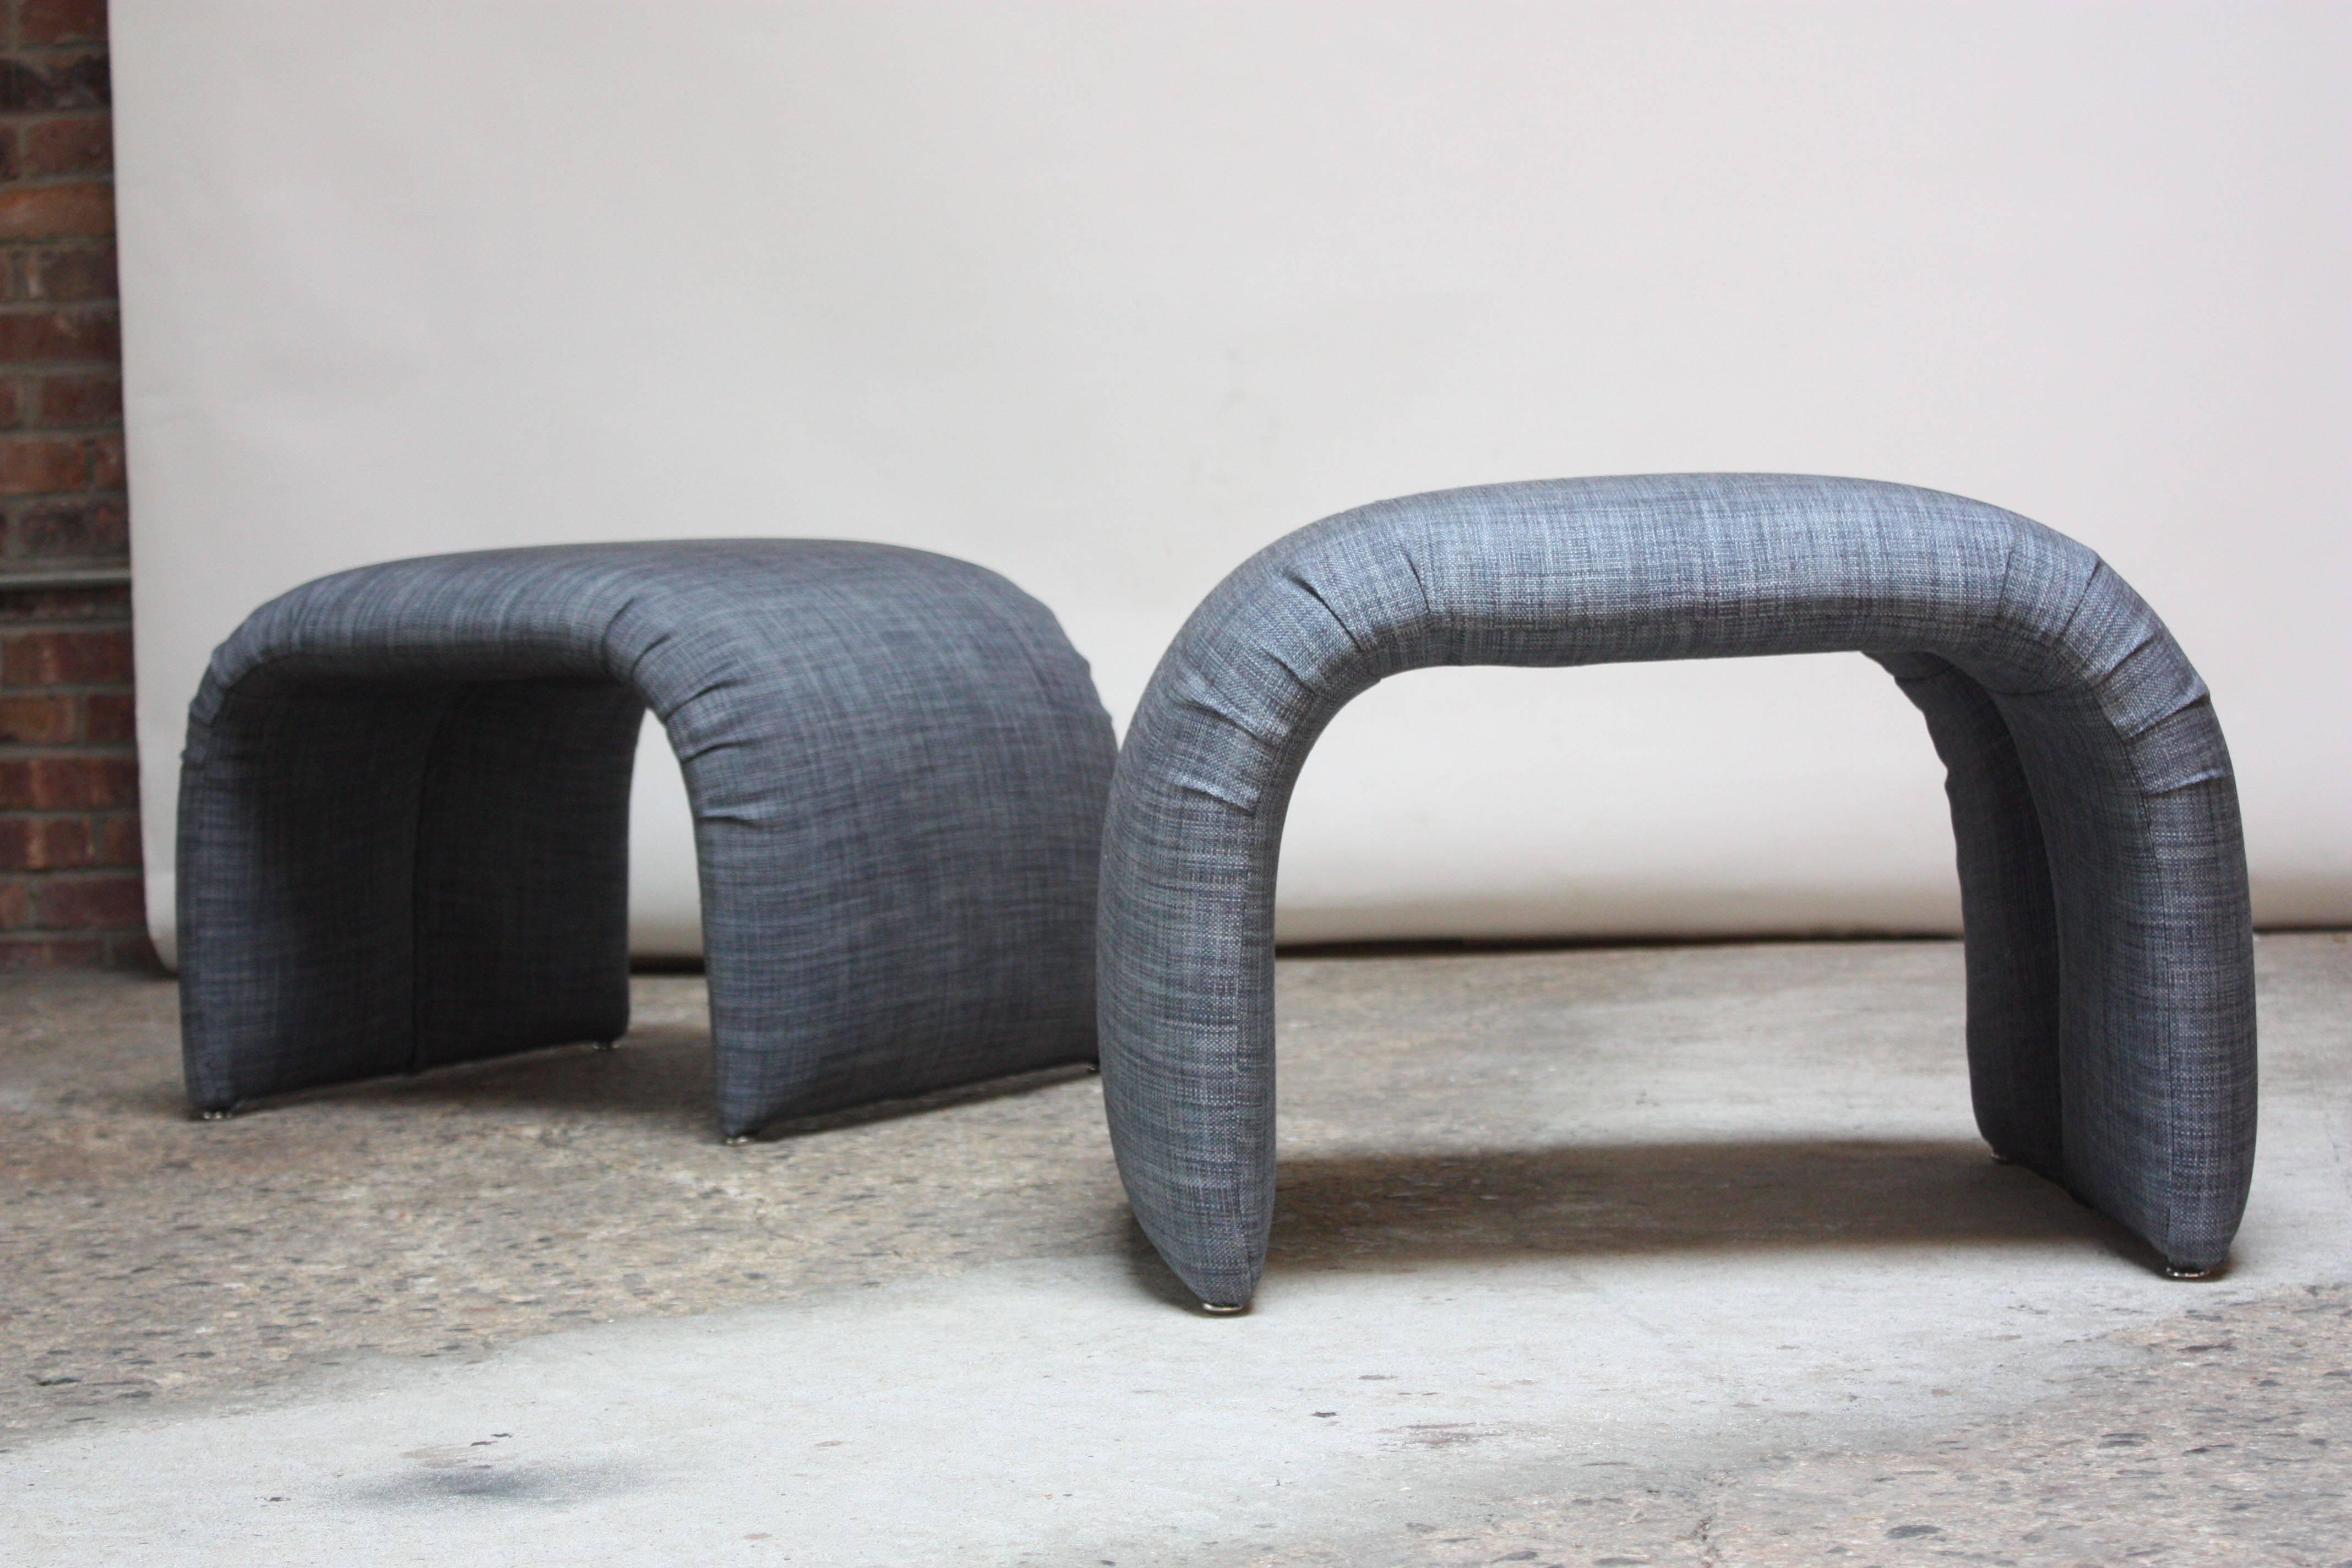 American Pair of Midcentury Fiberglass 'Waterfall' Benches or Ottomans